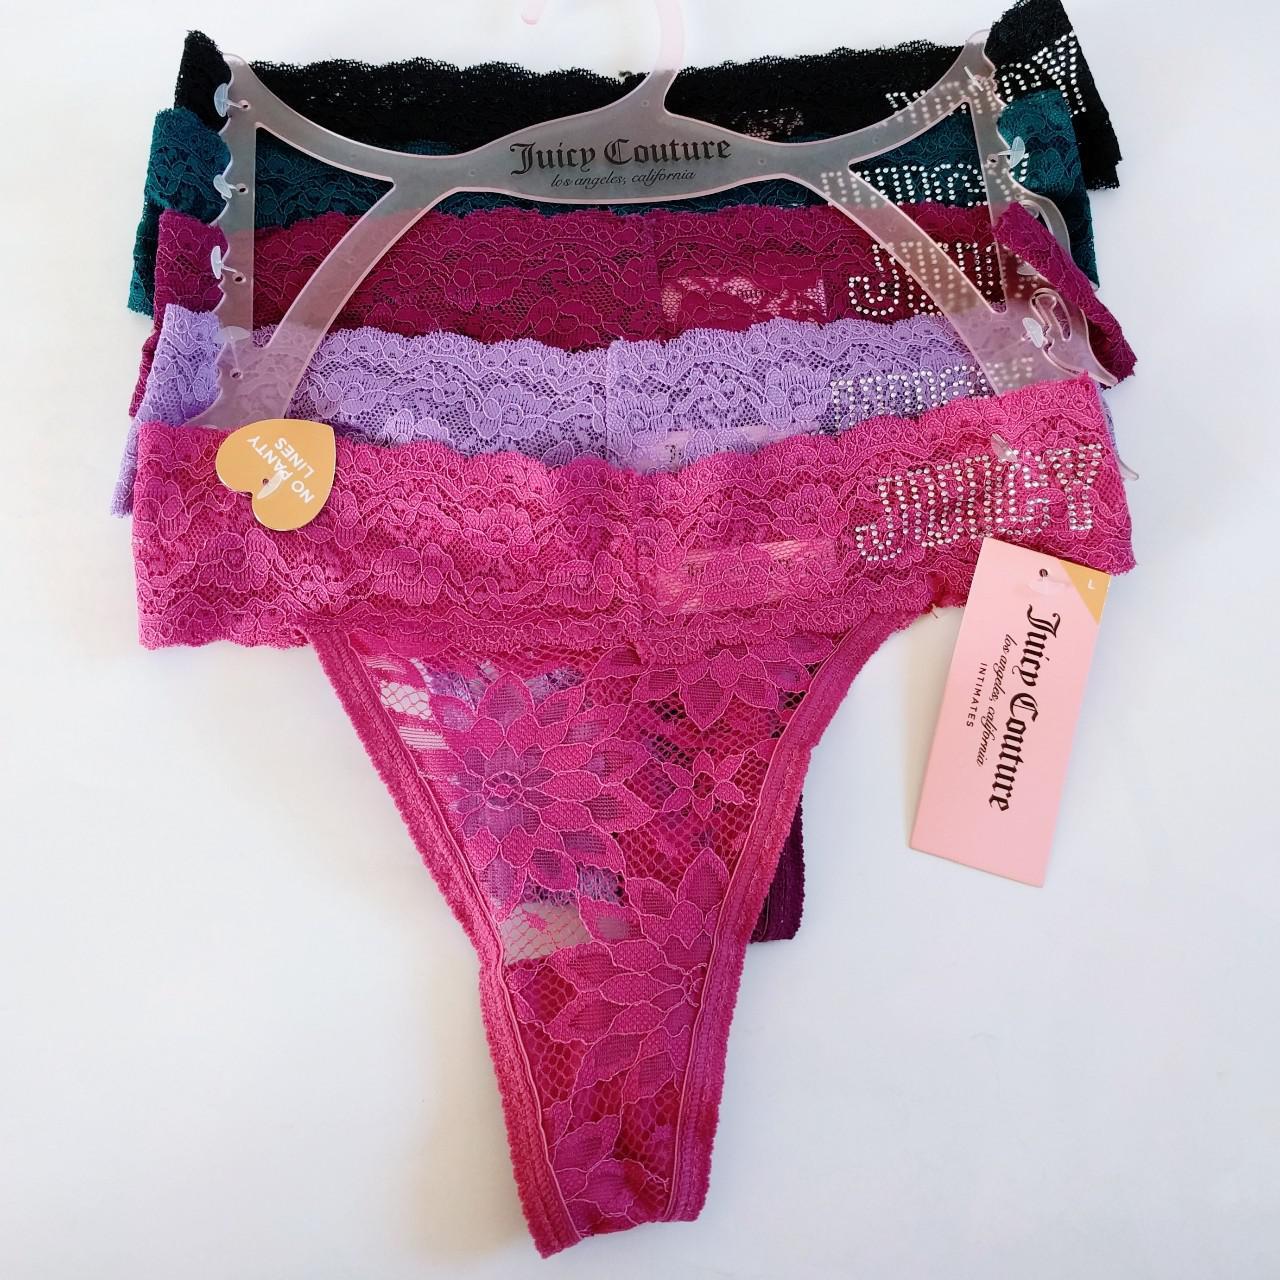 Juicy Couture Velvet intimates  Juicy couture, Couture, Clothes design